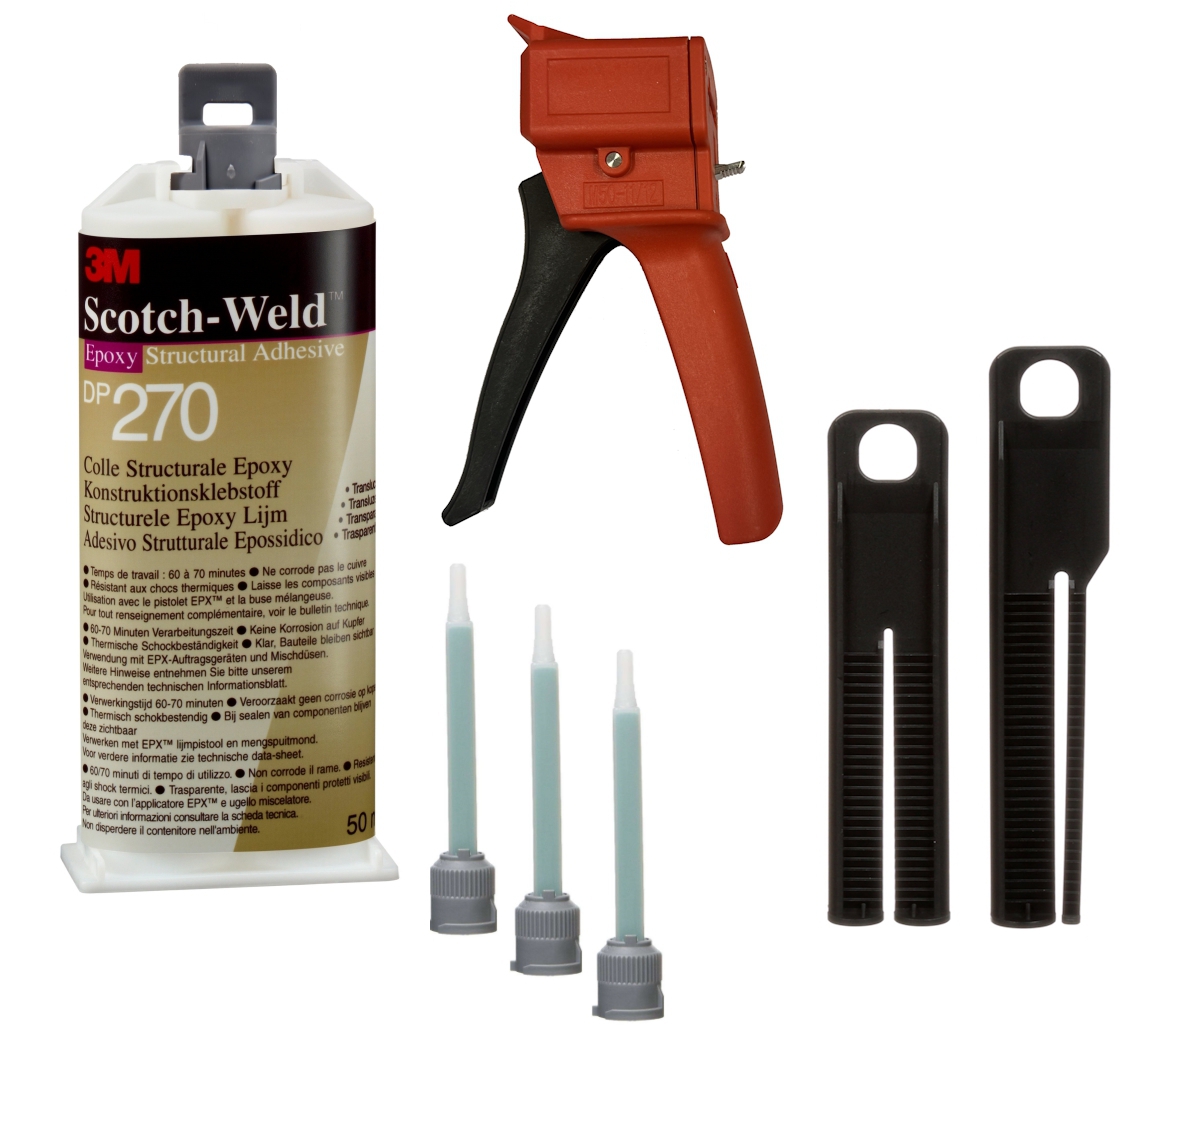 Starter set: 1x 3M Scotch-Weld 2-component construction adhesive EPX System DP270, black, 48.5 ml, 1x S-K-S hand tool for EPX 38 to 50 ml cartridges incl. feed piston 2:1